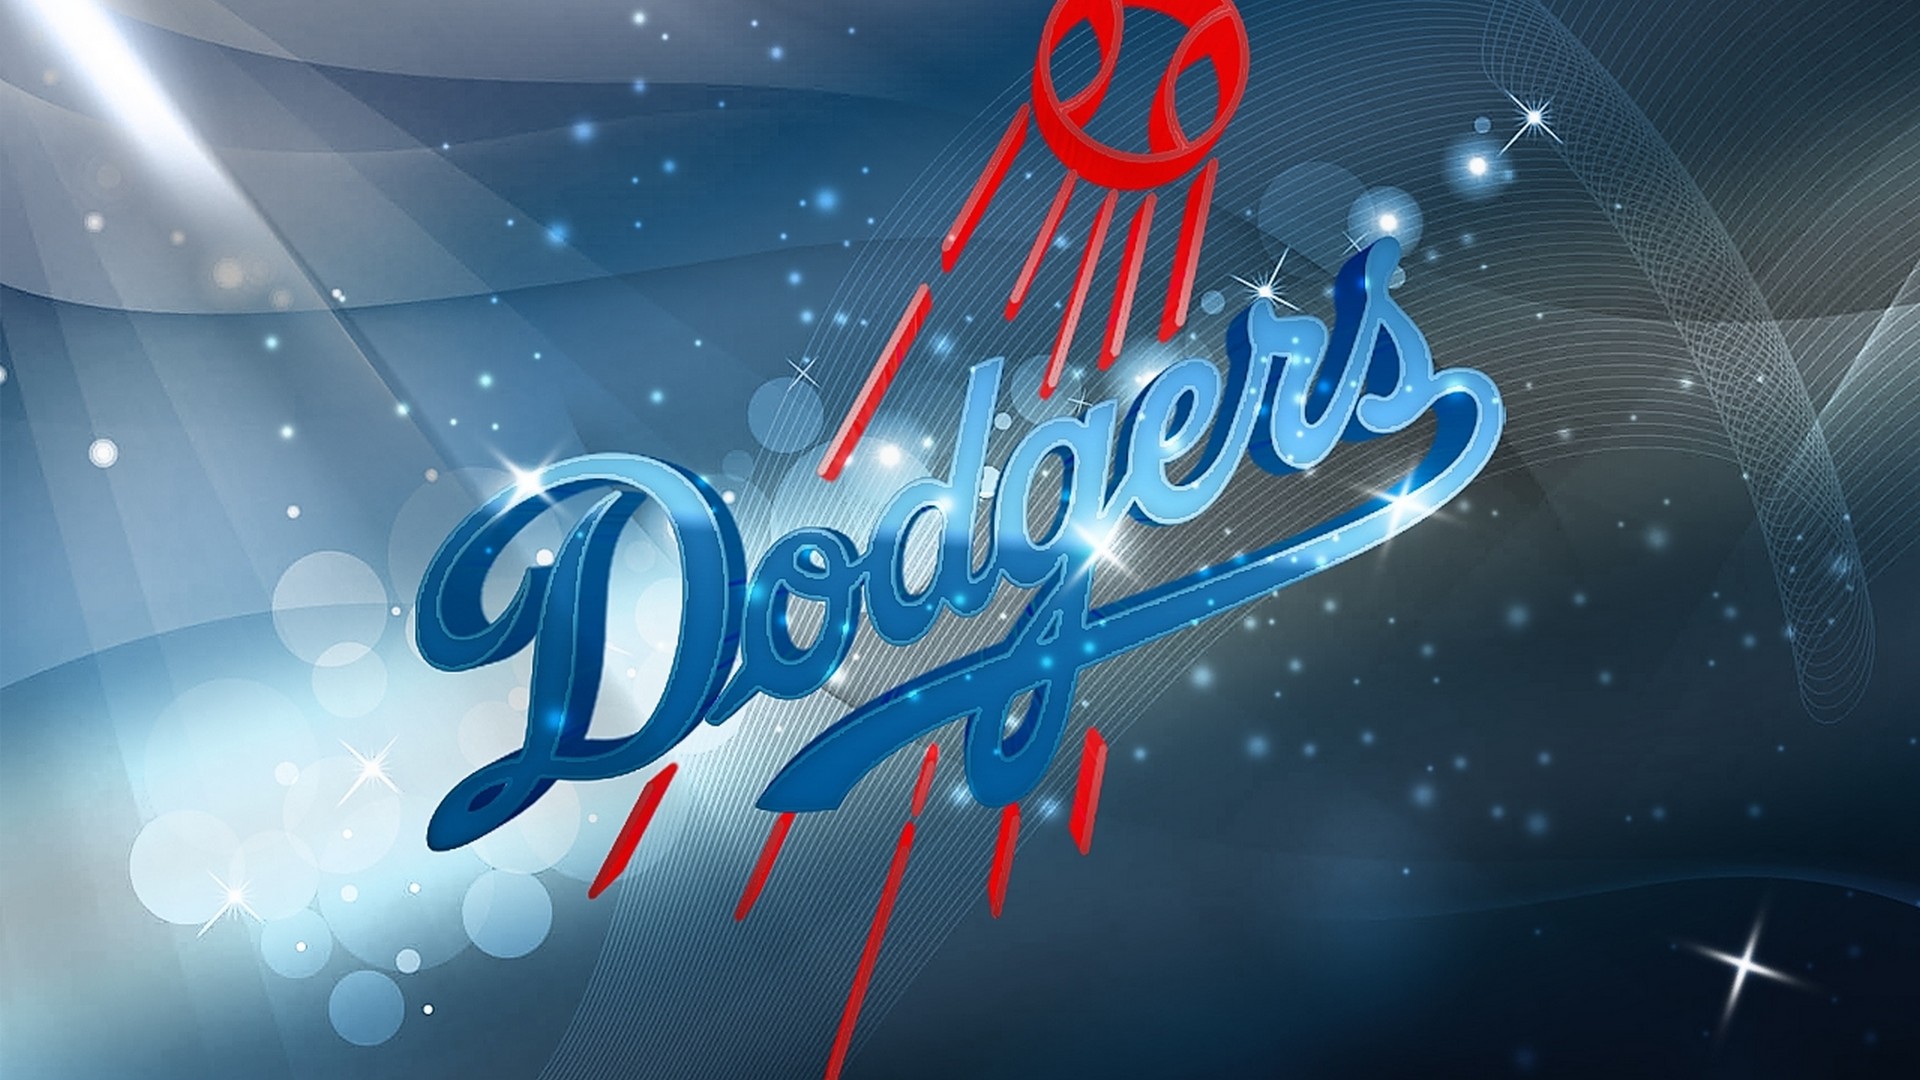 Backgrounds Los Angeles Dodgers HD with high-resolution 1920x1080 pixel. You can use this wallpaper for Mac Desktop Wallpaper, Laptop Screensavers, Android Wallpapers, Tablet or iPhone Home Screen and another mobile phone device